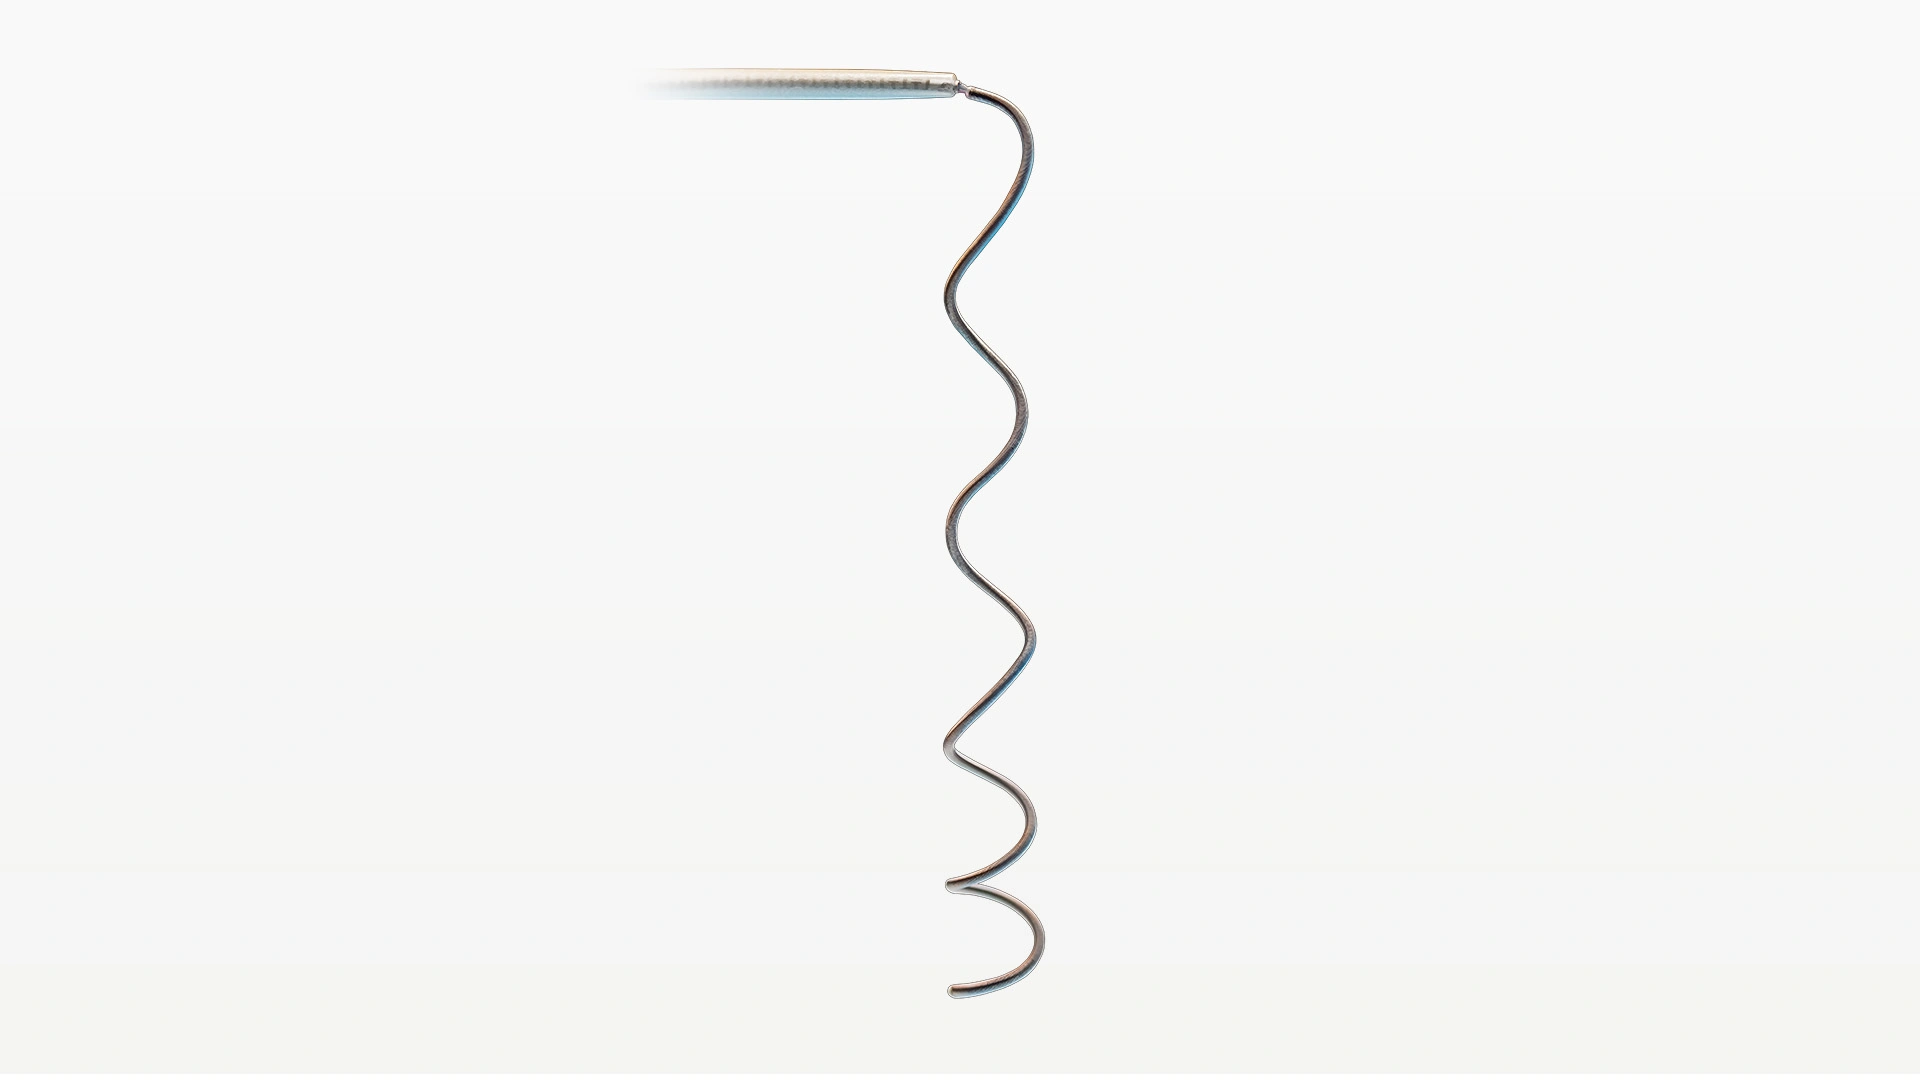 Extra soft smart coil hanging from detachment handle twisting to showcase flexibility